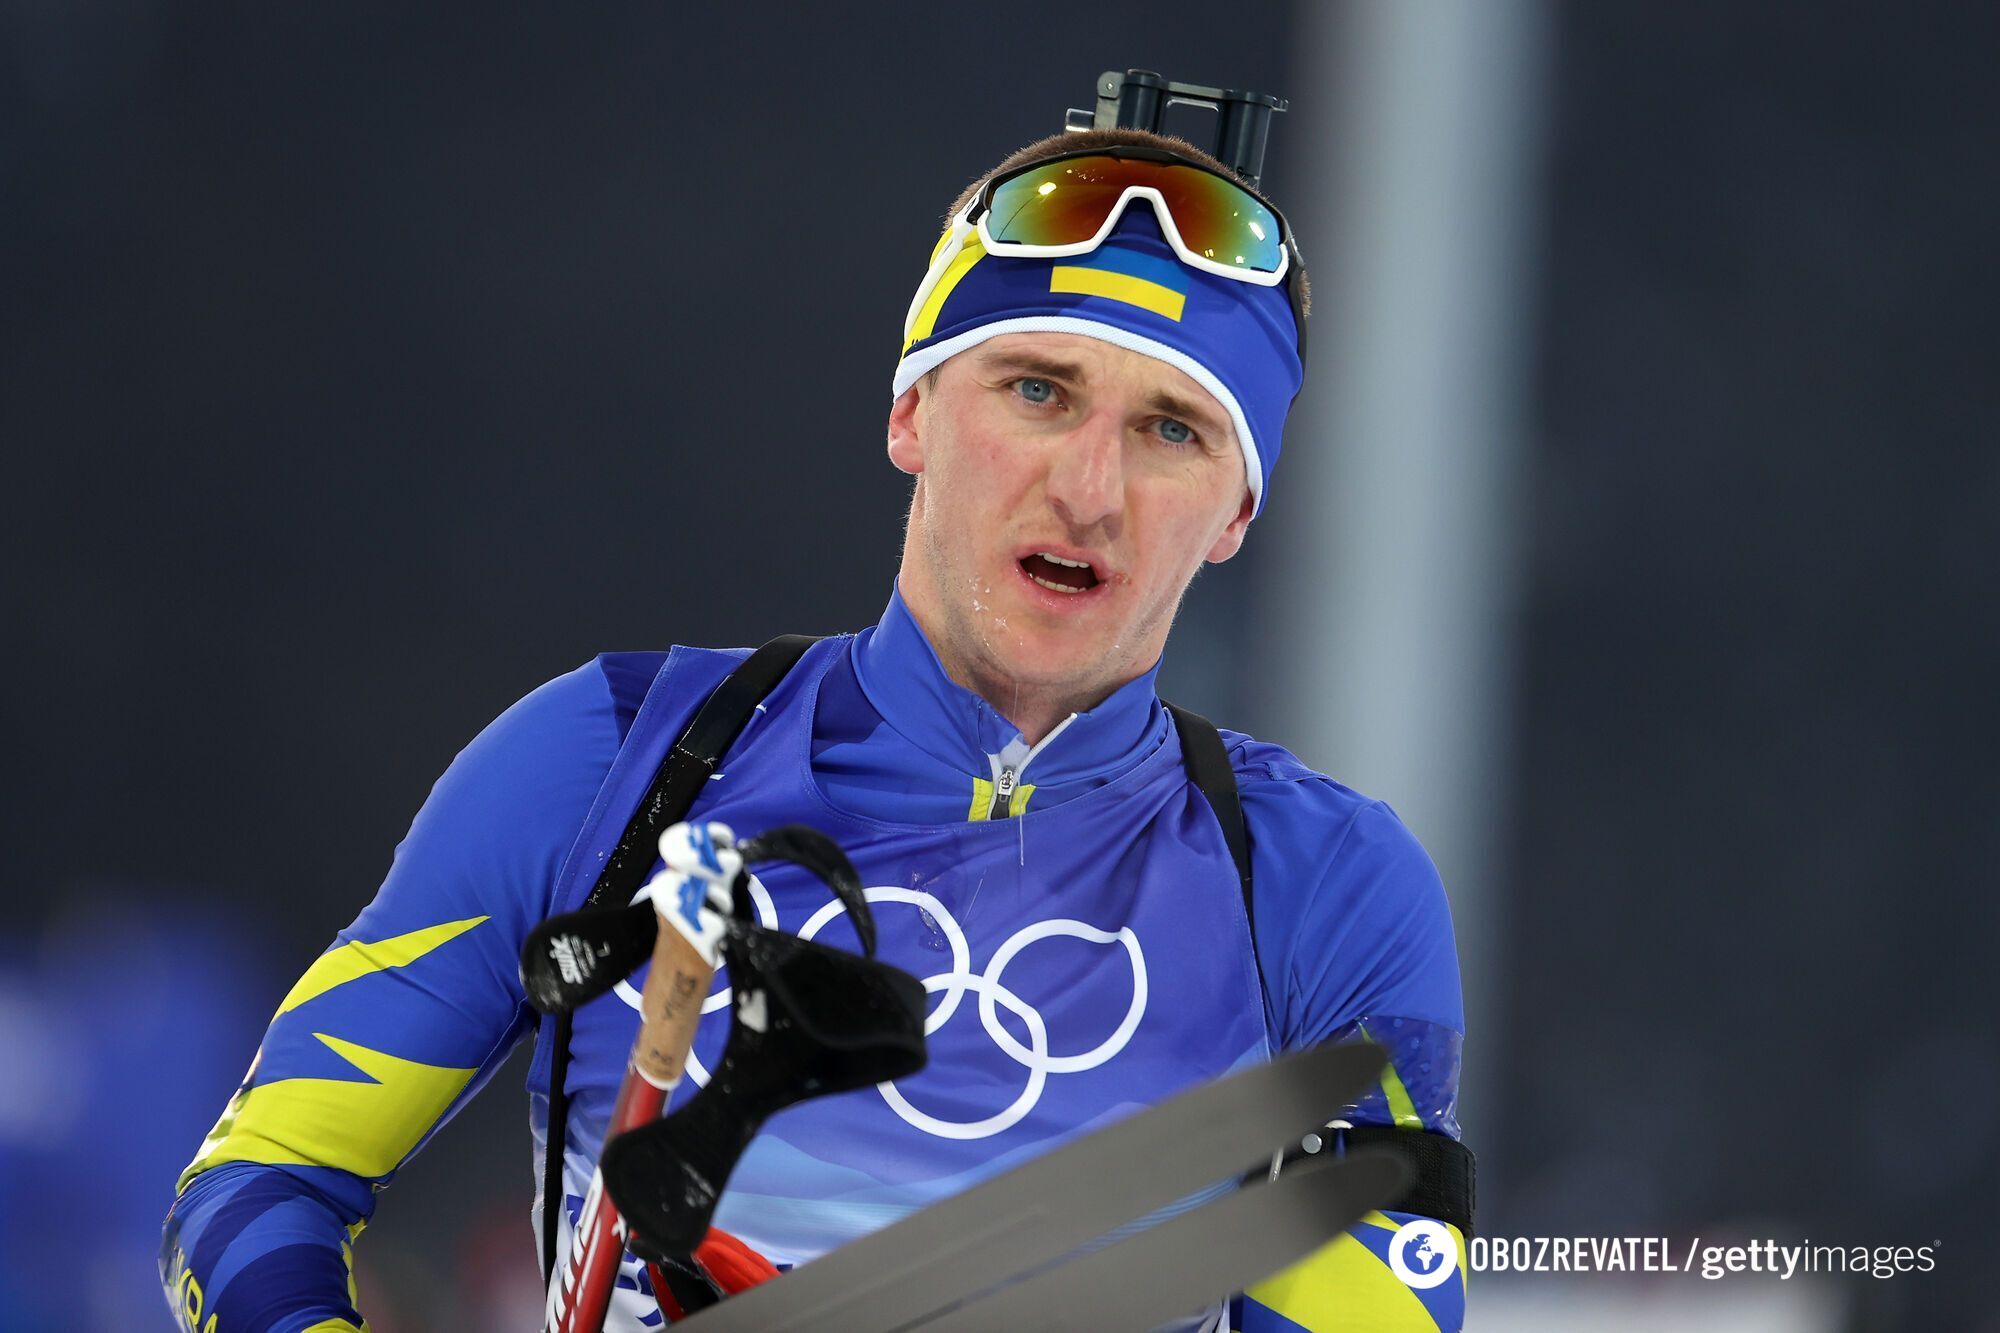 ''Absolutely zero'': captain of the Ukrainian biathlon team evaluates performance at the World Cup